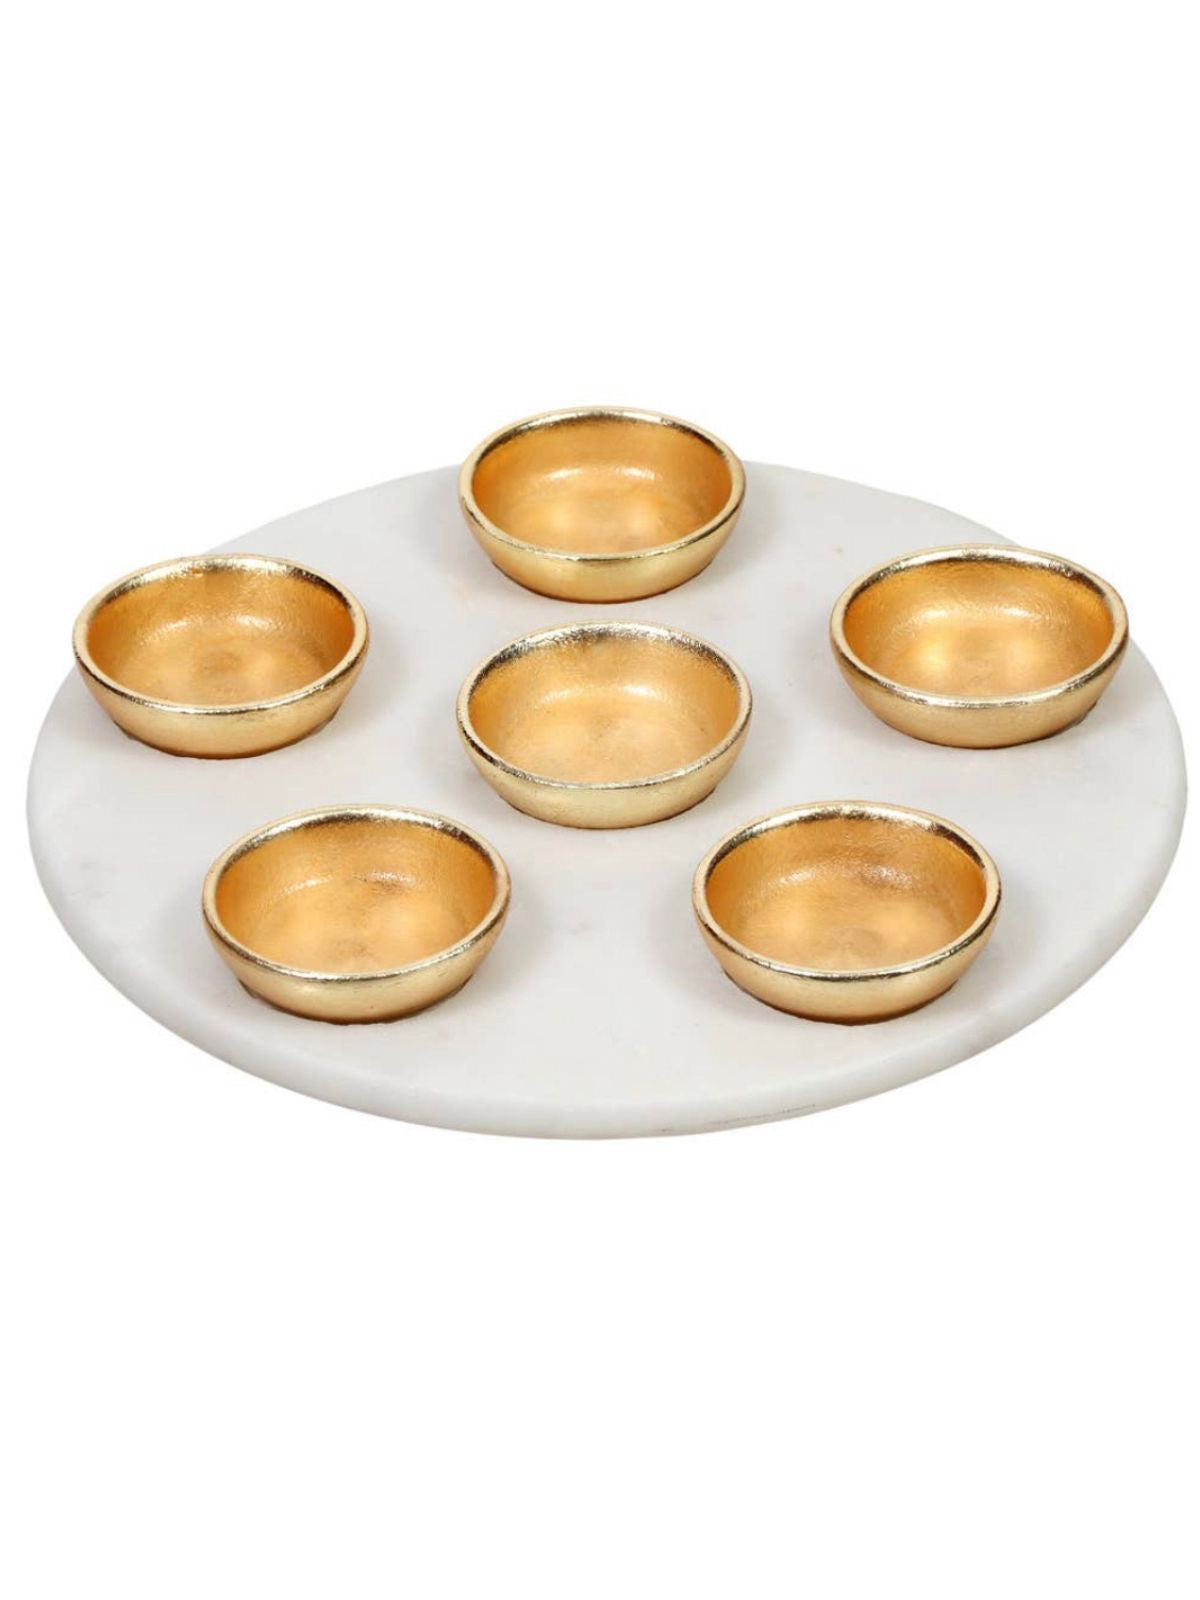 This Luxurious Seder Plate Features White Marble and Stainless Steel Gold Dishes. 